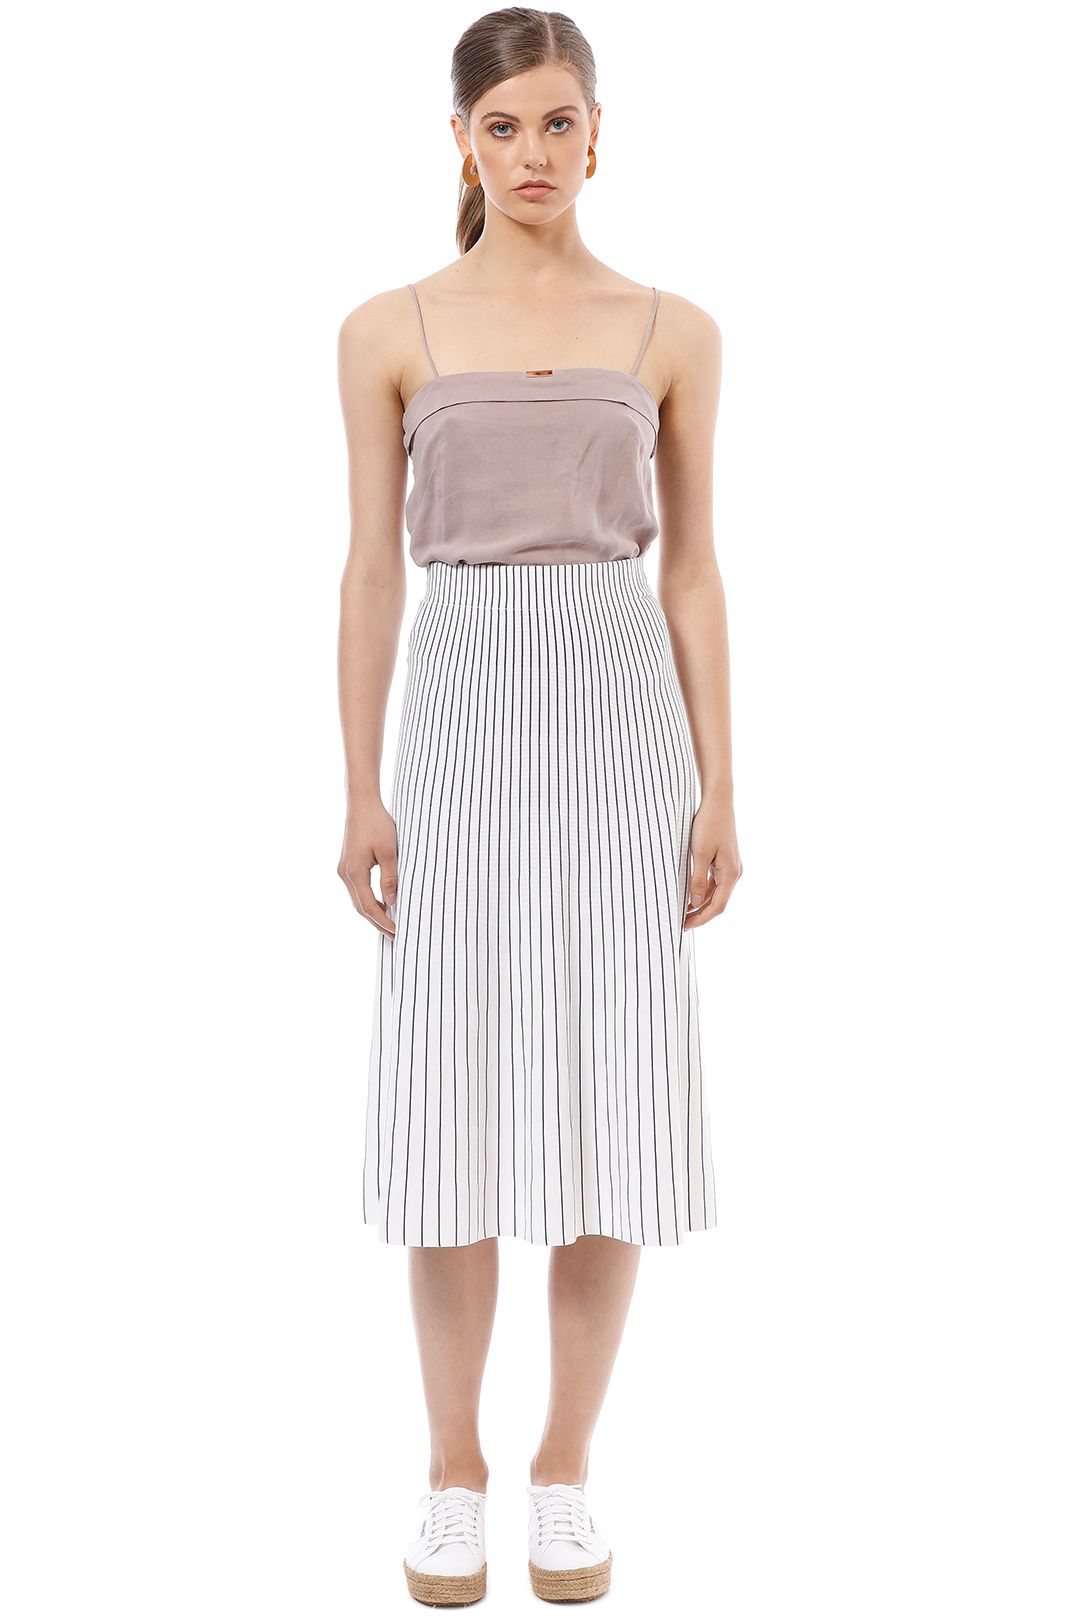 Elka Collective - Ruby Skirt - White Stripe - Front